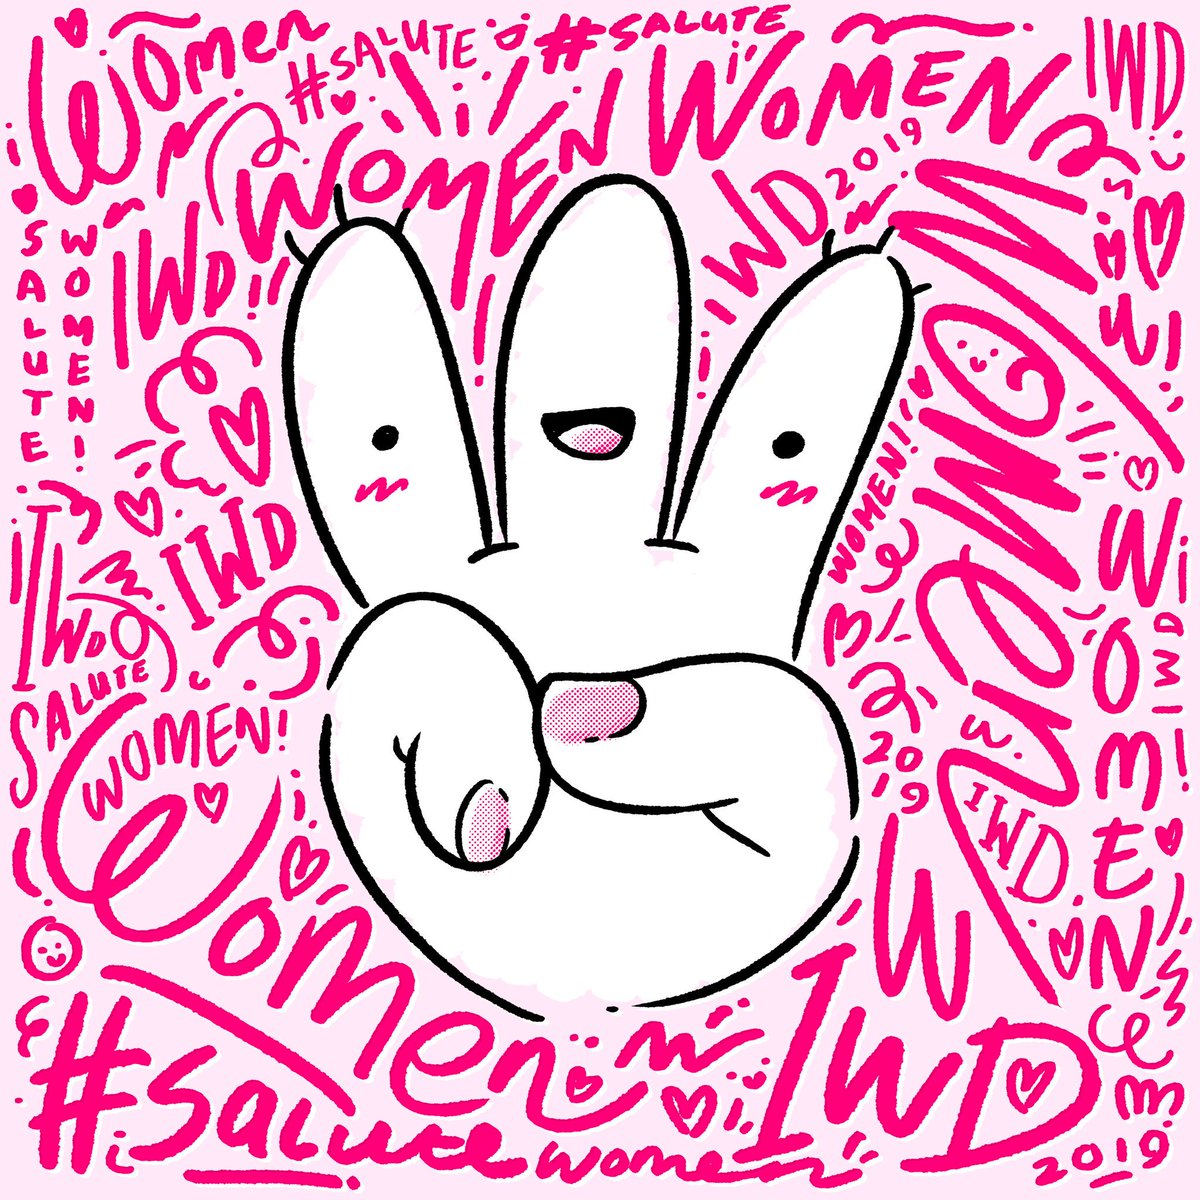 What a day for @IntlWD Here at Boys + Girls, we are inundated with incredible work on the Salute_Women Instagram page. Thank you to everyone involved in creating great work! #salutewomen #IWD2019 #BalanceforBetter